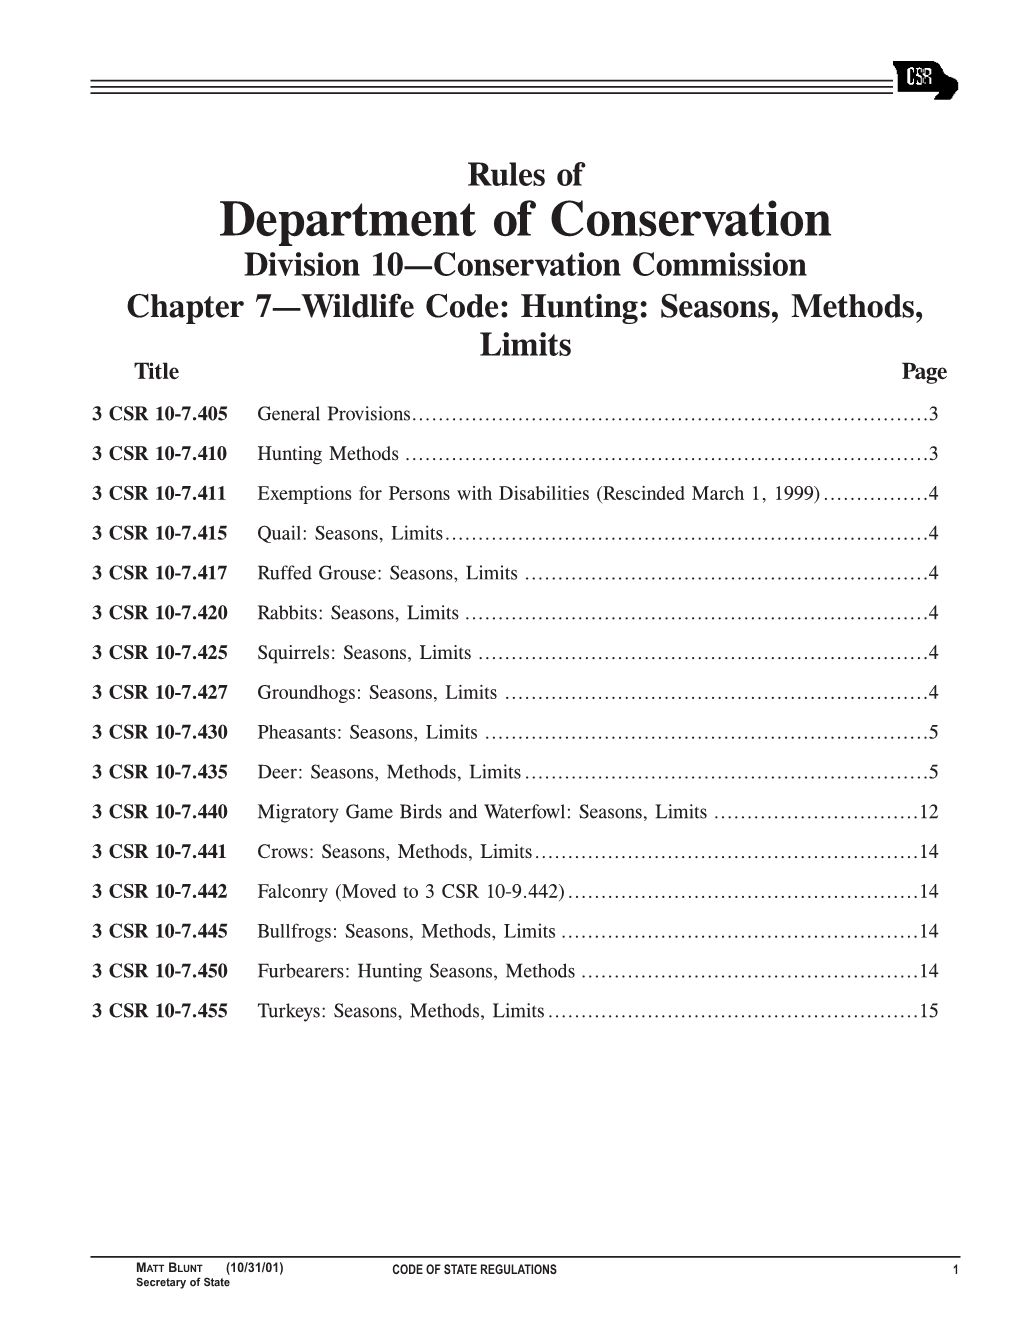 Hunting: Seasons, Methods, Limits Title Page